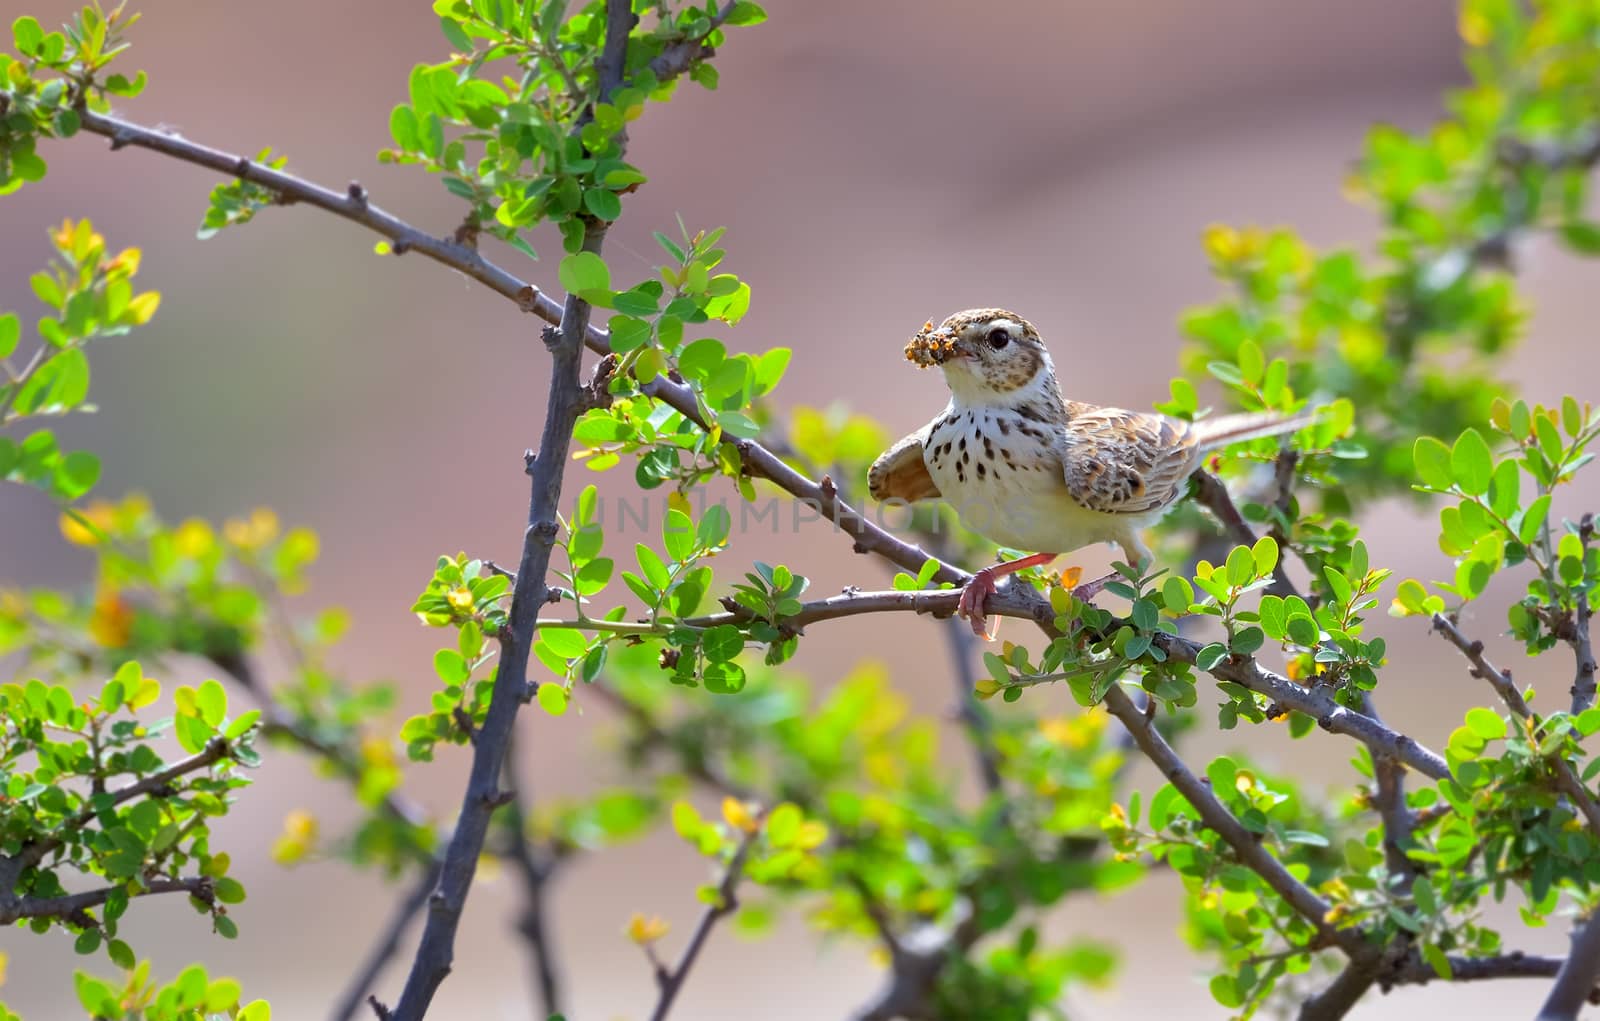 The bush lark is a species of lark in the family Alaudidae found in South Asia.